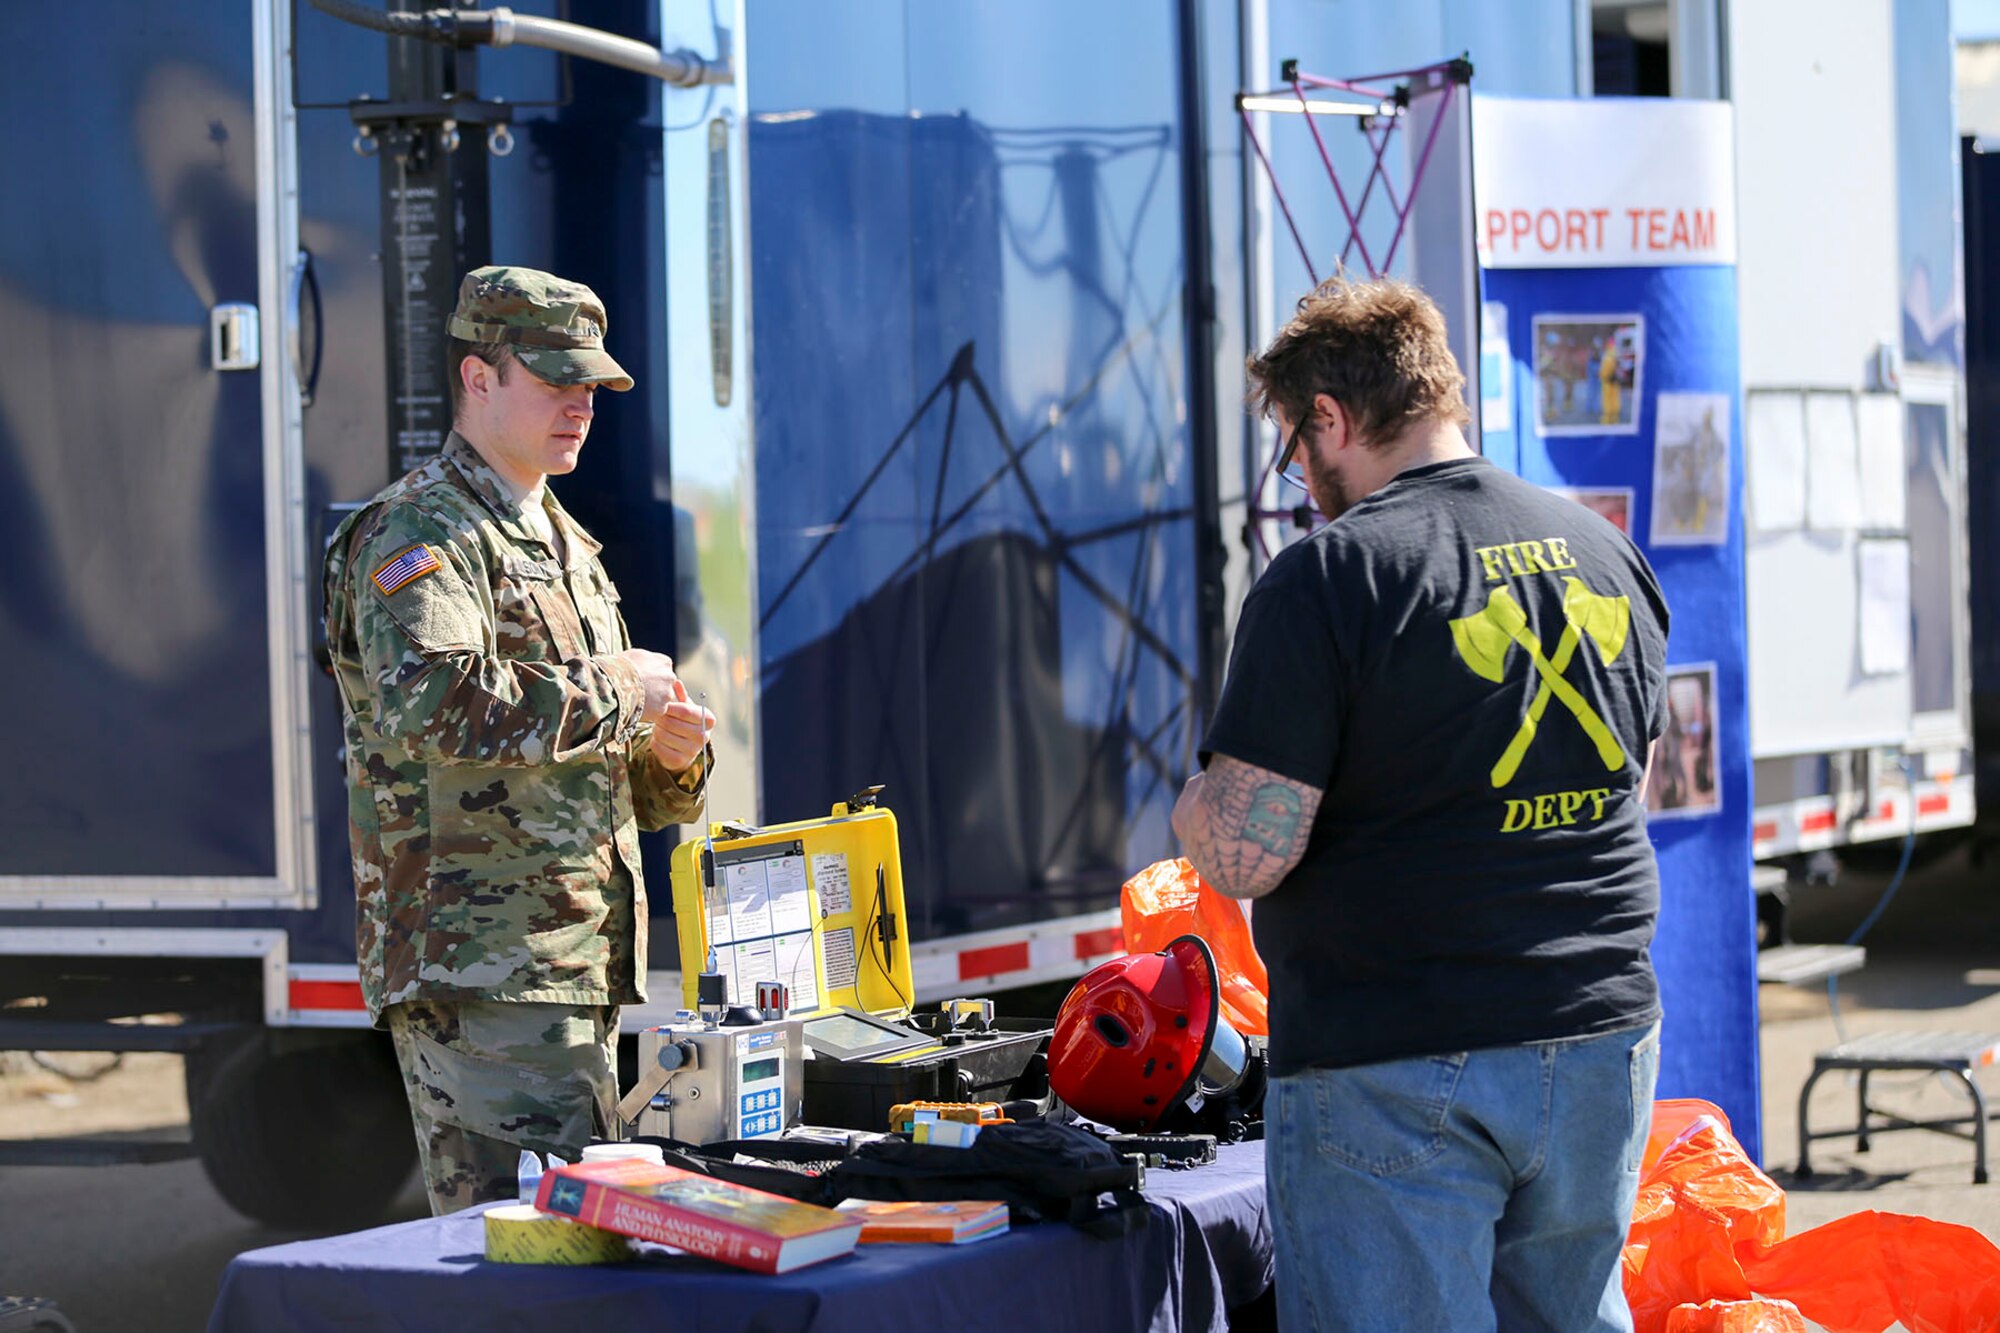 Alaska Guard Sgt. Bradly Olson, a chemical, biological, radiological and nuclear noncommissioned officer with the 103rd Civil Support Team (Weapons of Mass Destruction), briefs a local resident on CST capabilities at the Edward G. Pitka Sr. Airport in Galena, Alaska, May 31, 2017. More than 30 service members from the Alaska National Guard and United States Military Entrance Processing Command teamed up to provide community outreach efforts with residents of the Yukon River village. (U.S. Army National Guard photo by Staff Sgt. Balinda O’Neal Dresel)